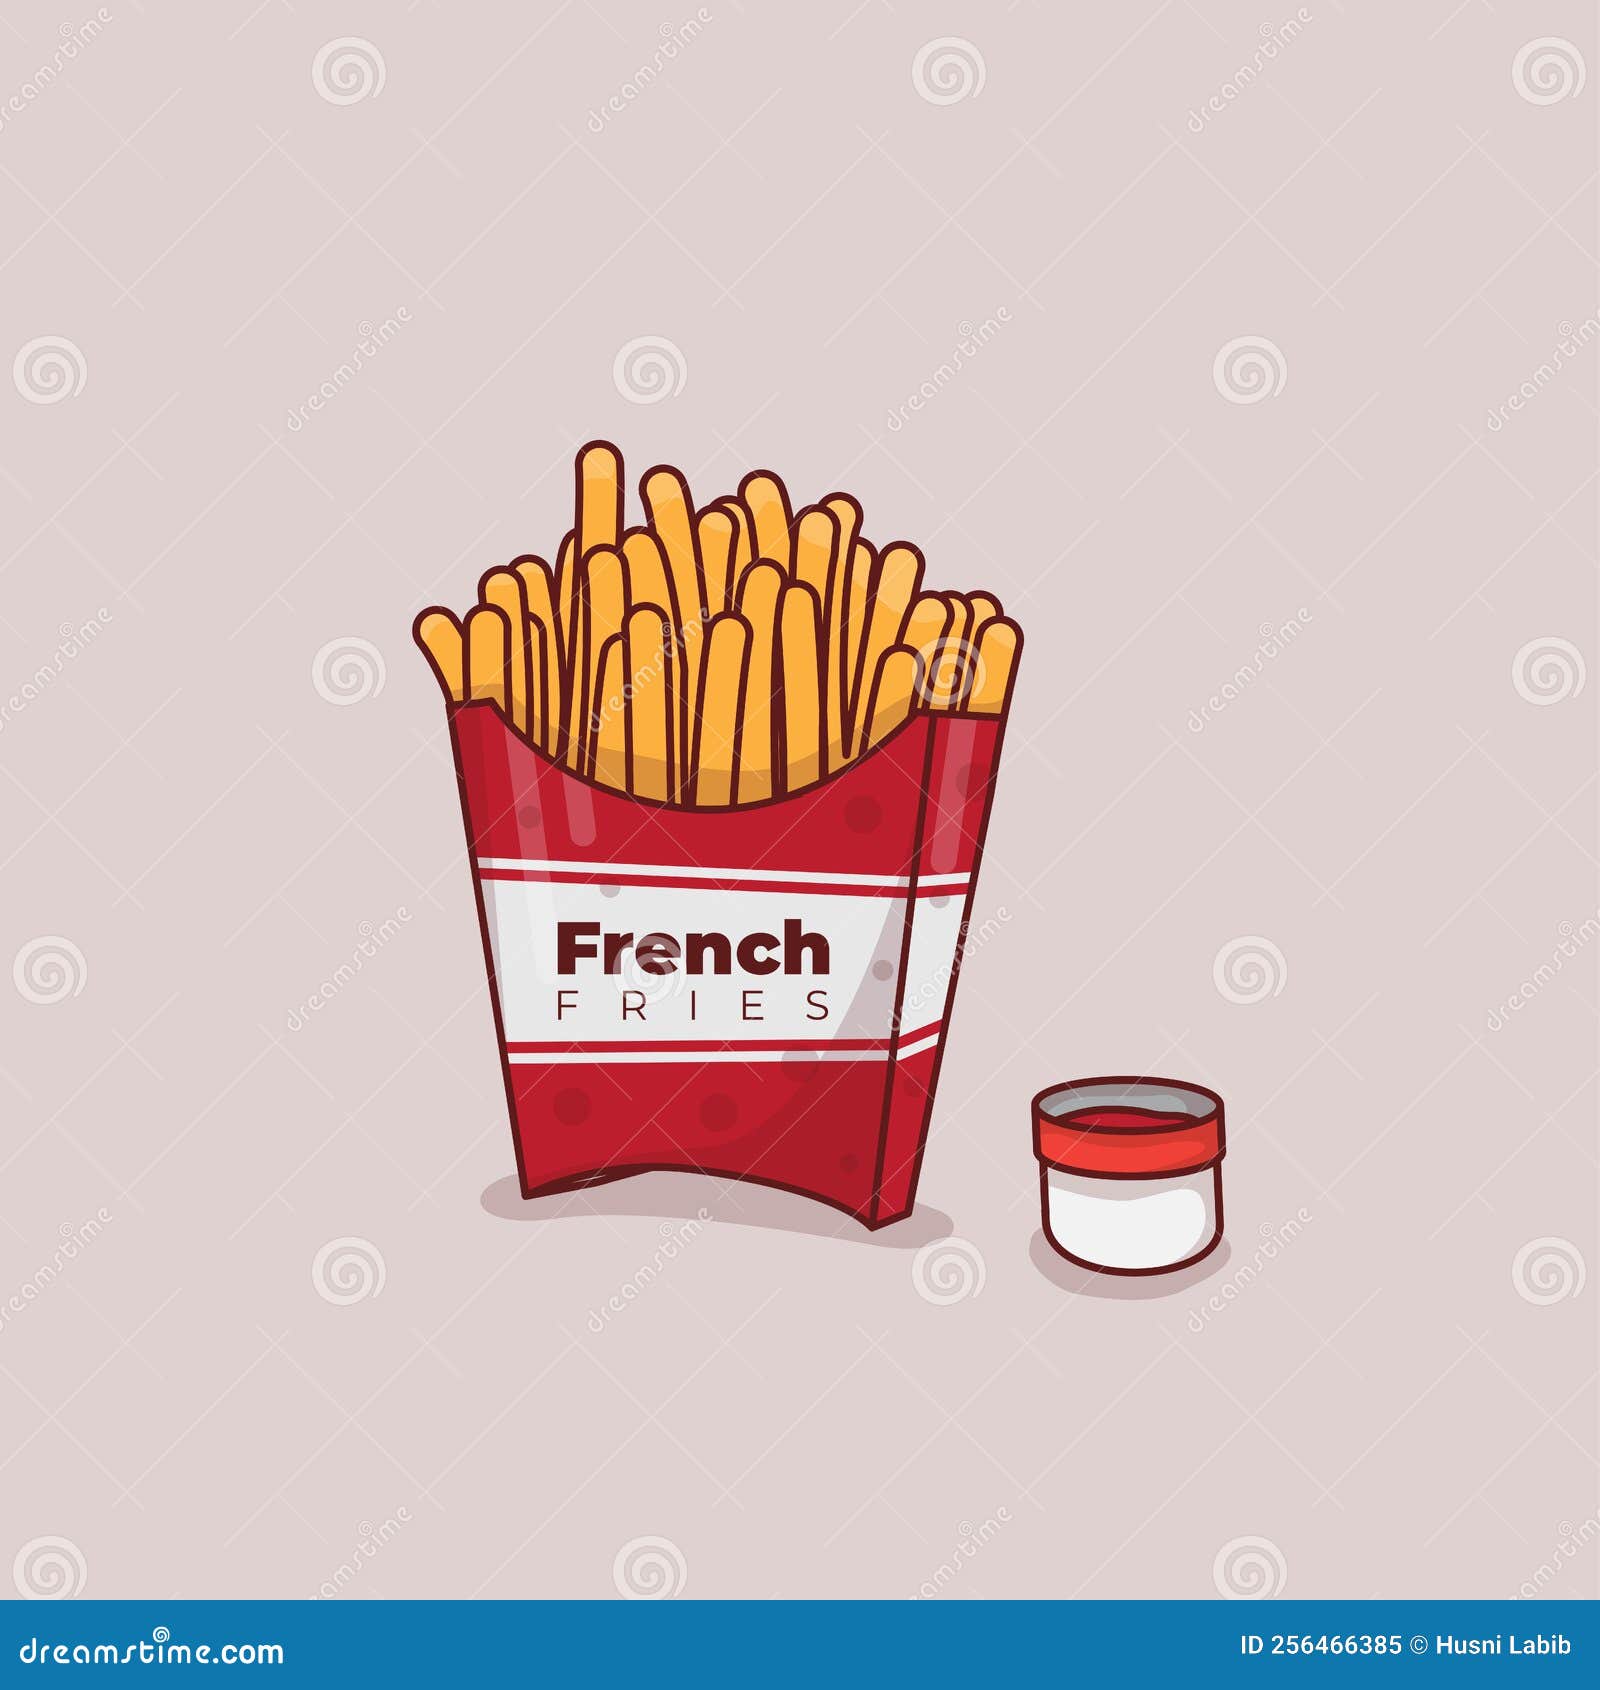 French fries packaging red box template design Vector Image